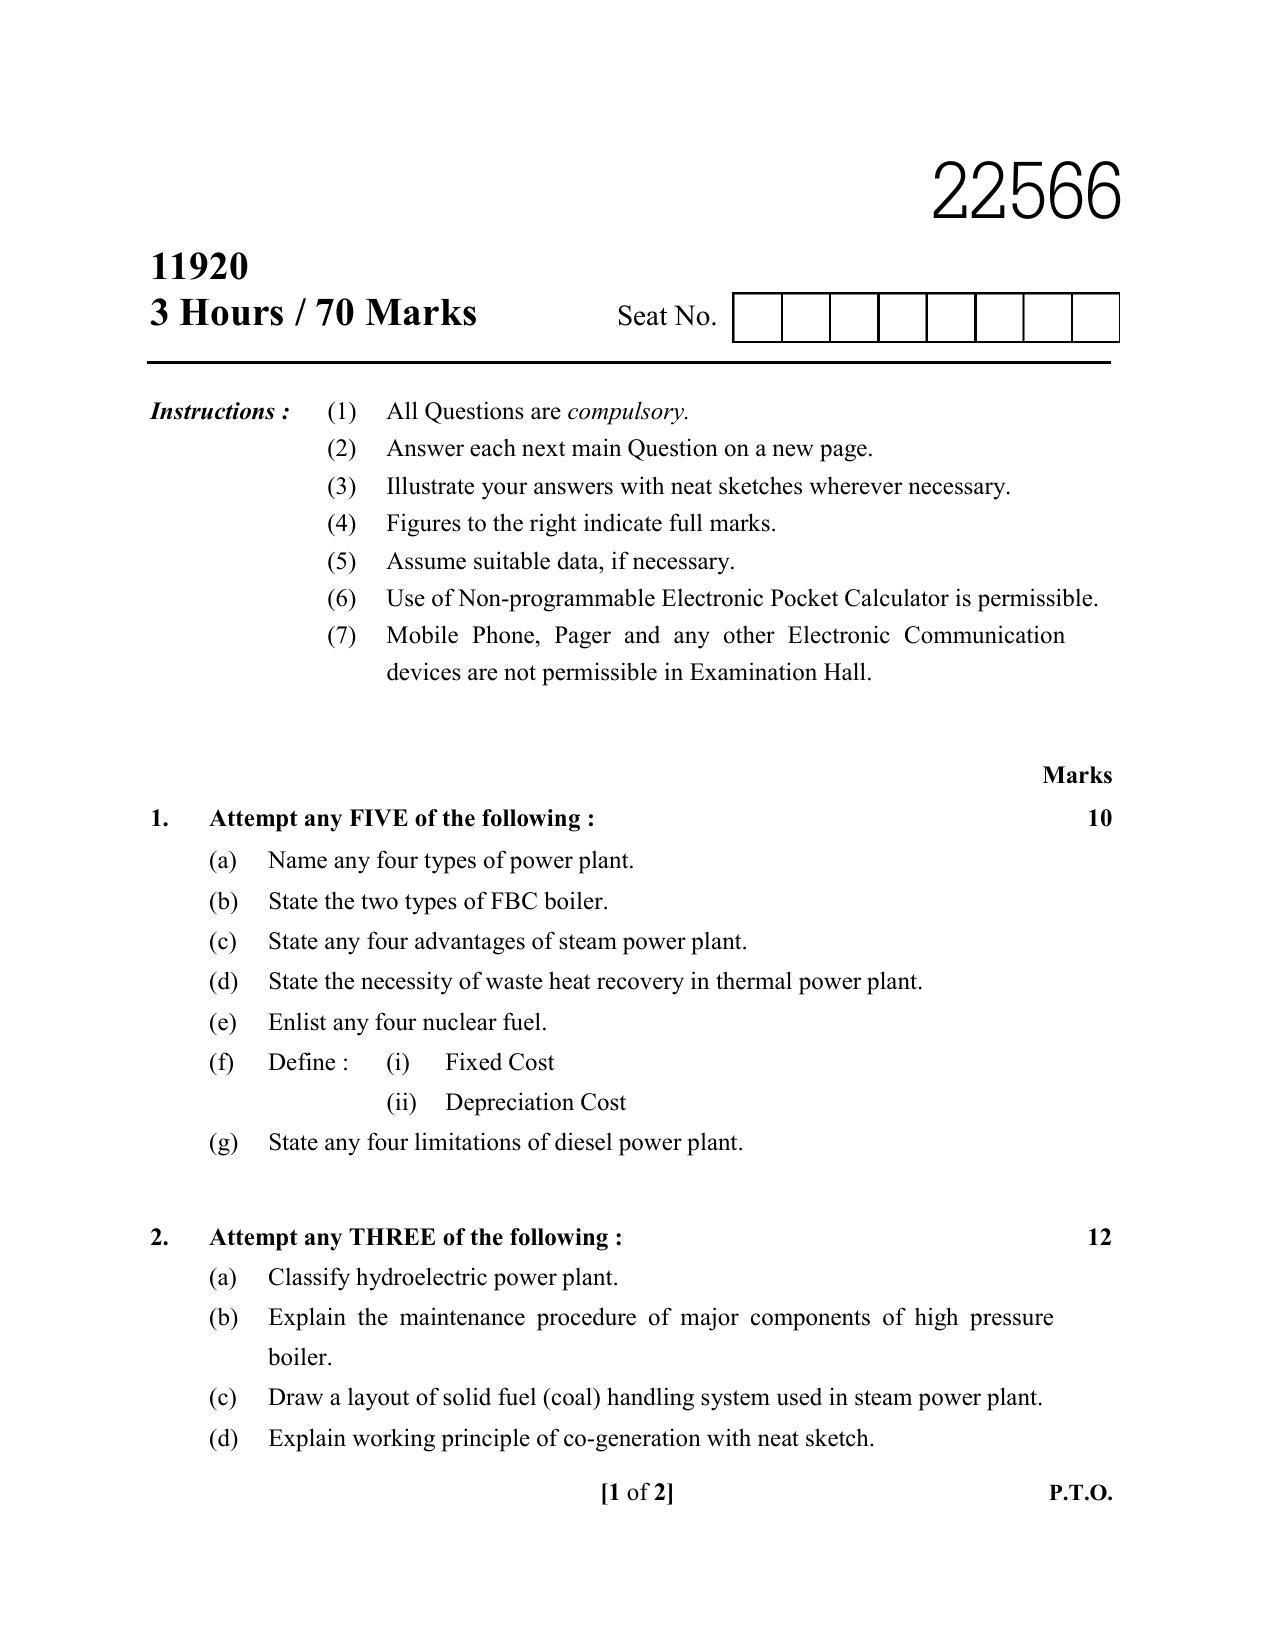 MSBTE Question Paper - 2019 - Power Plant Engineering (Elective) - Page 1